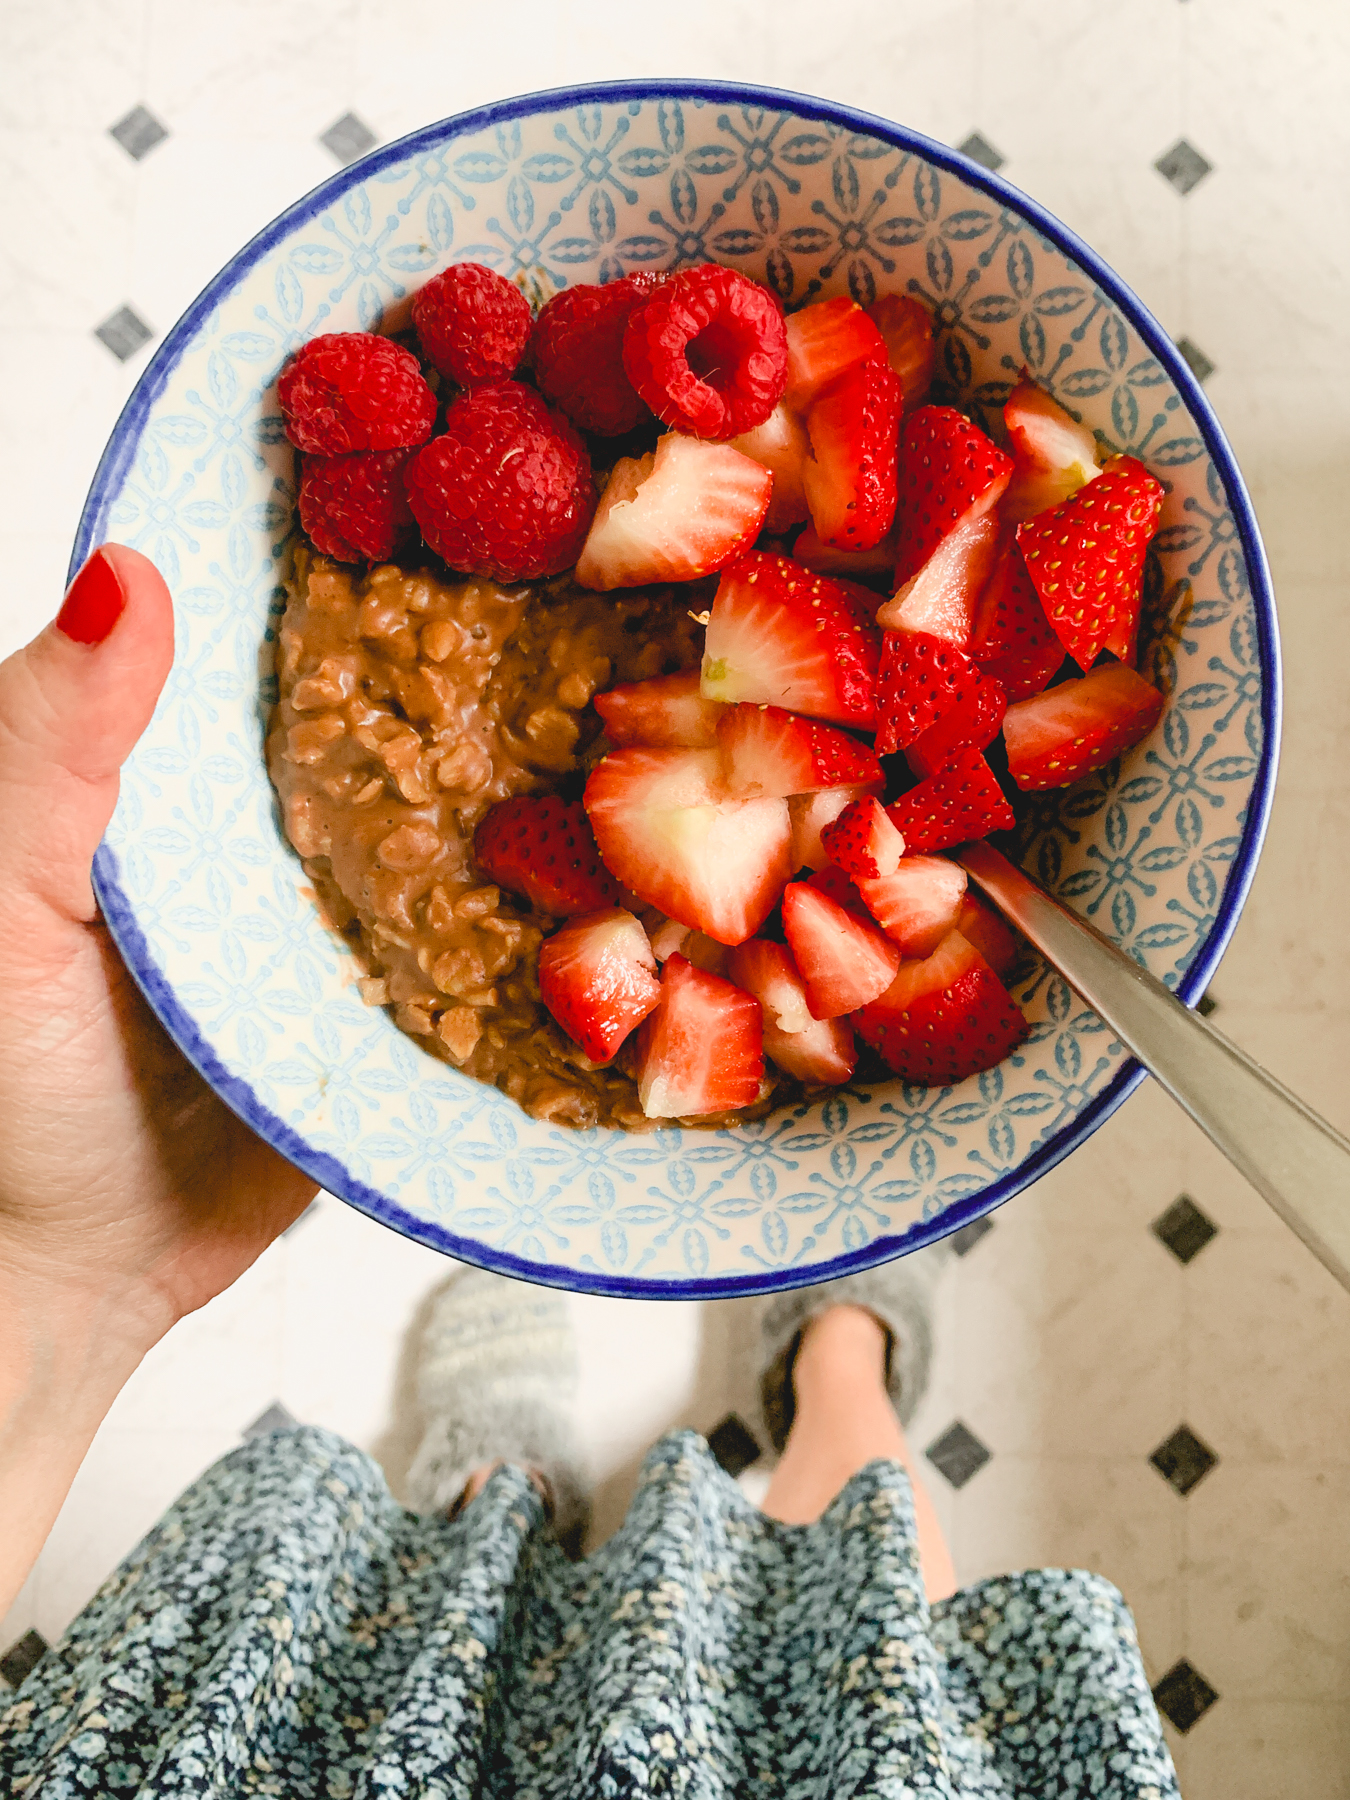 bowl of chocolate oatmeal with strawberries and raspberries